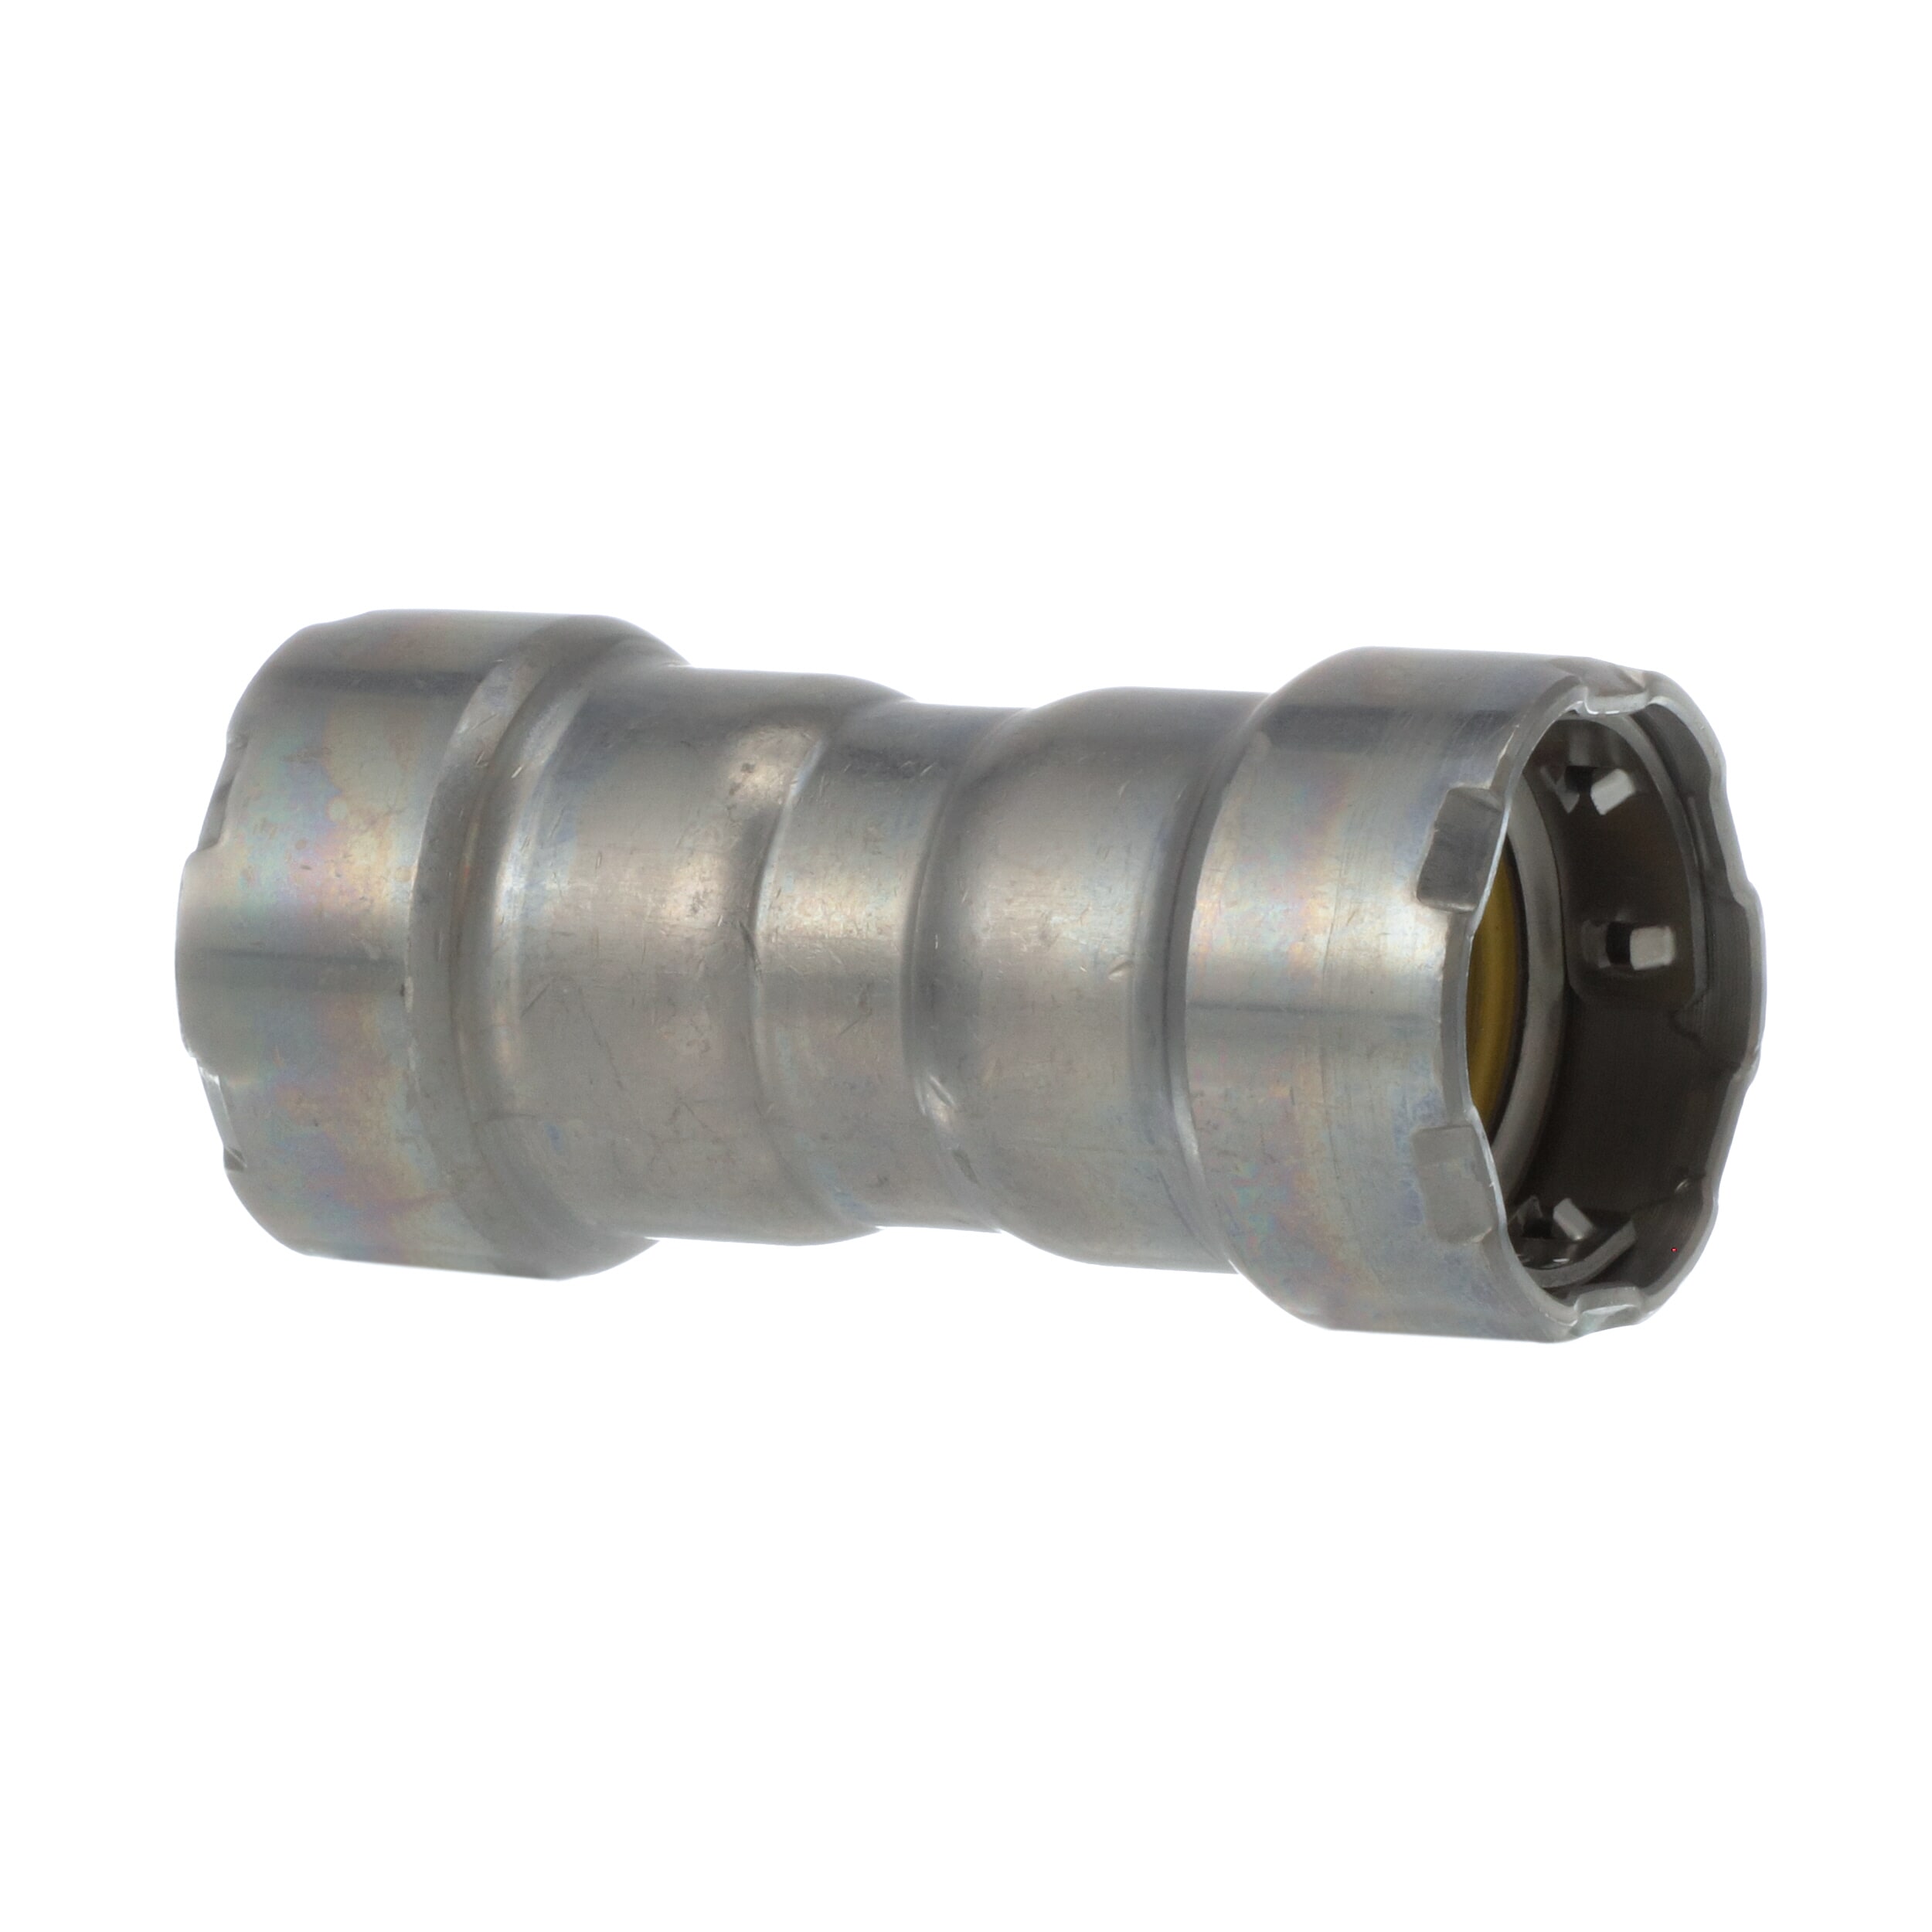 MegaPress® 25001 Pipe Coupling With Stop, 1/2 in Nominal, Press End Style, Carbon Steel